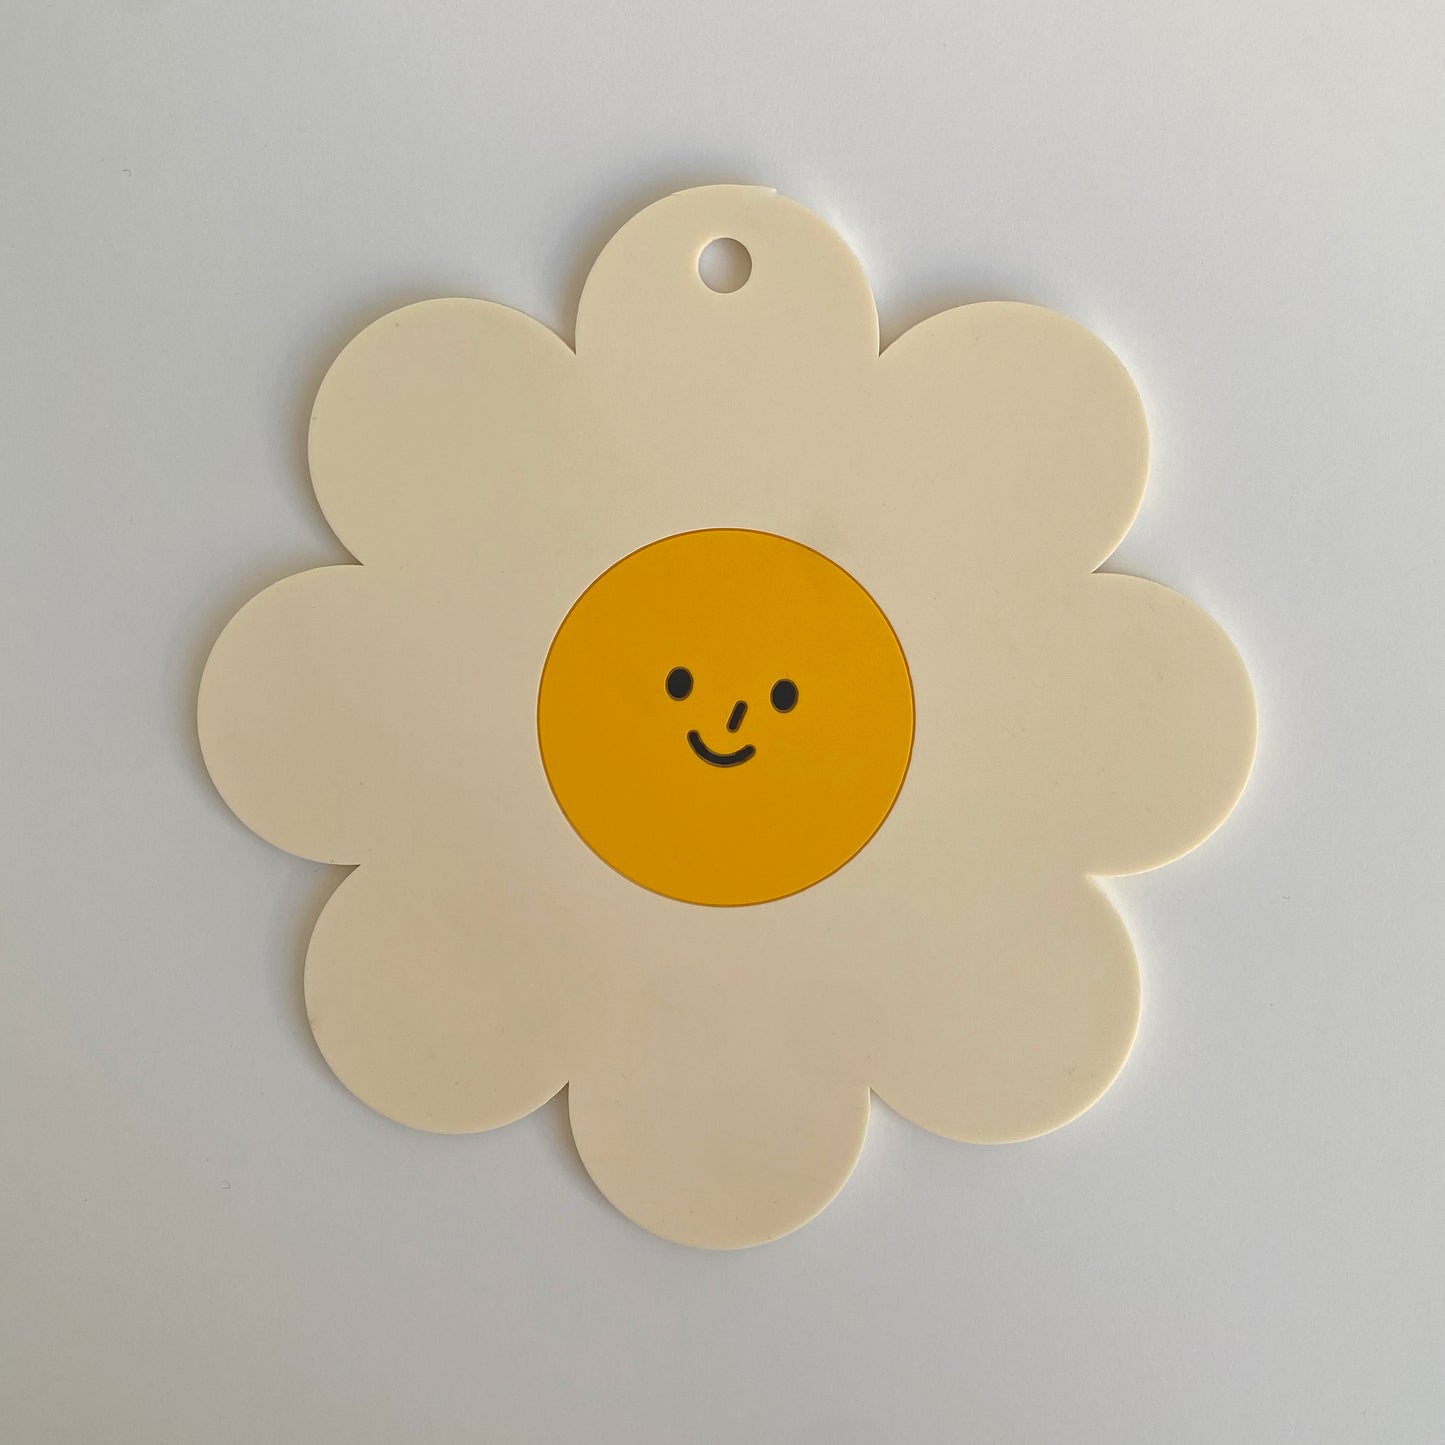 Silicone smiley flower coaster & pot holder in yellow